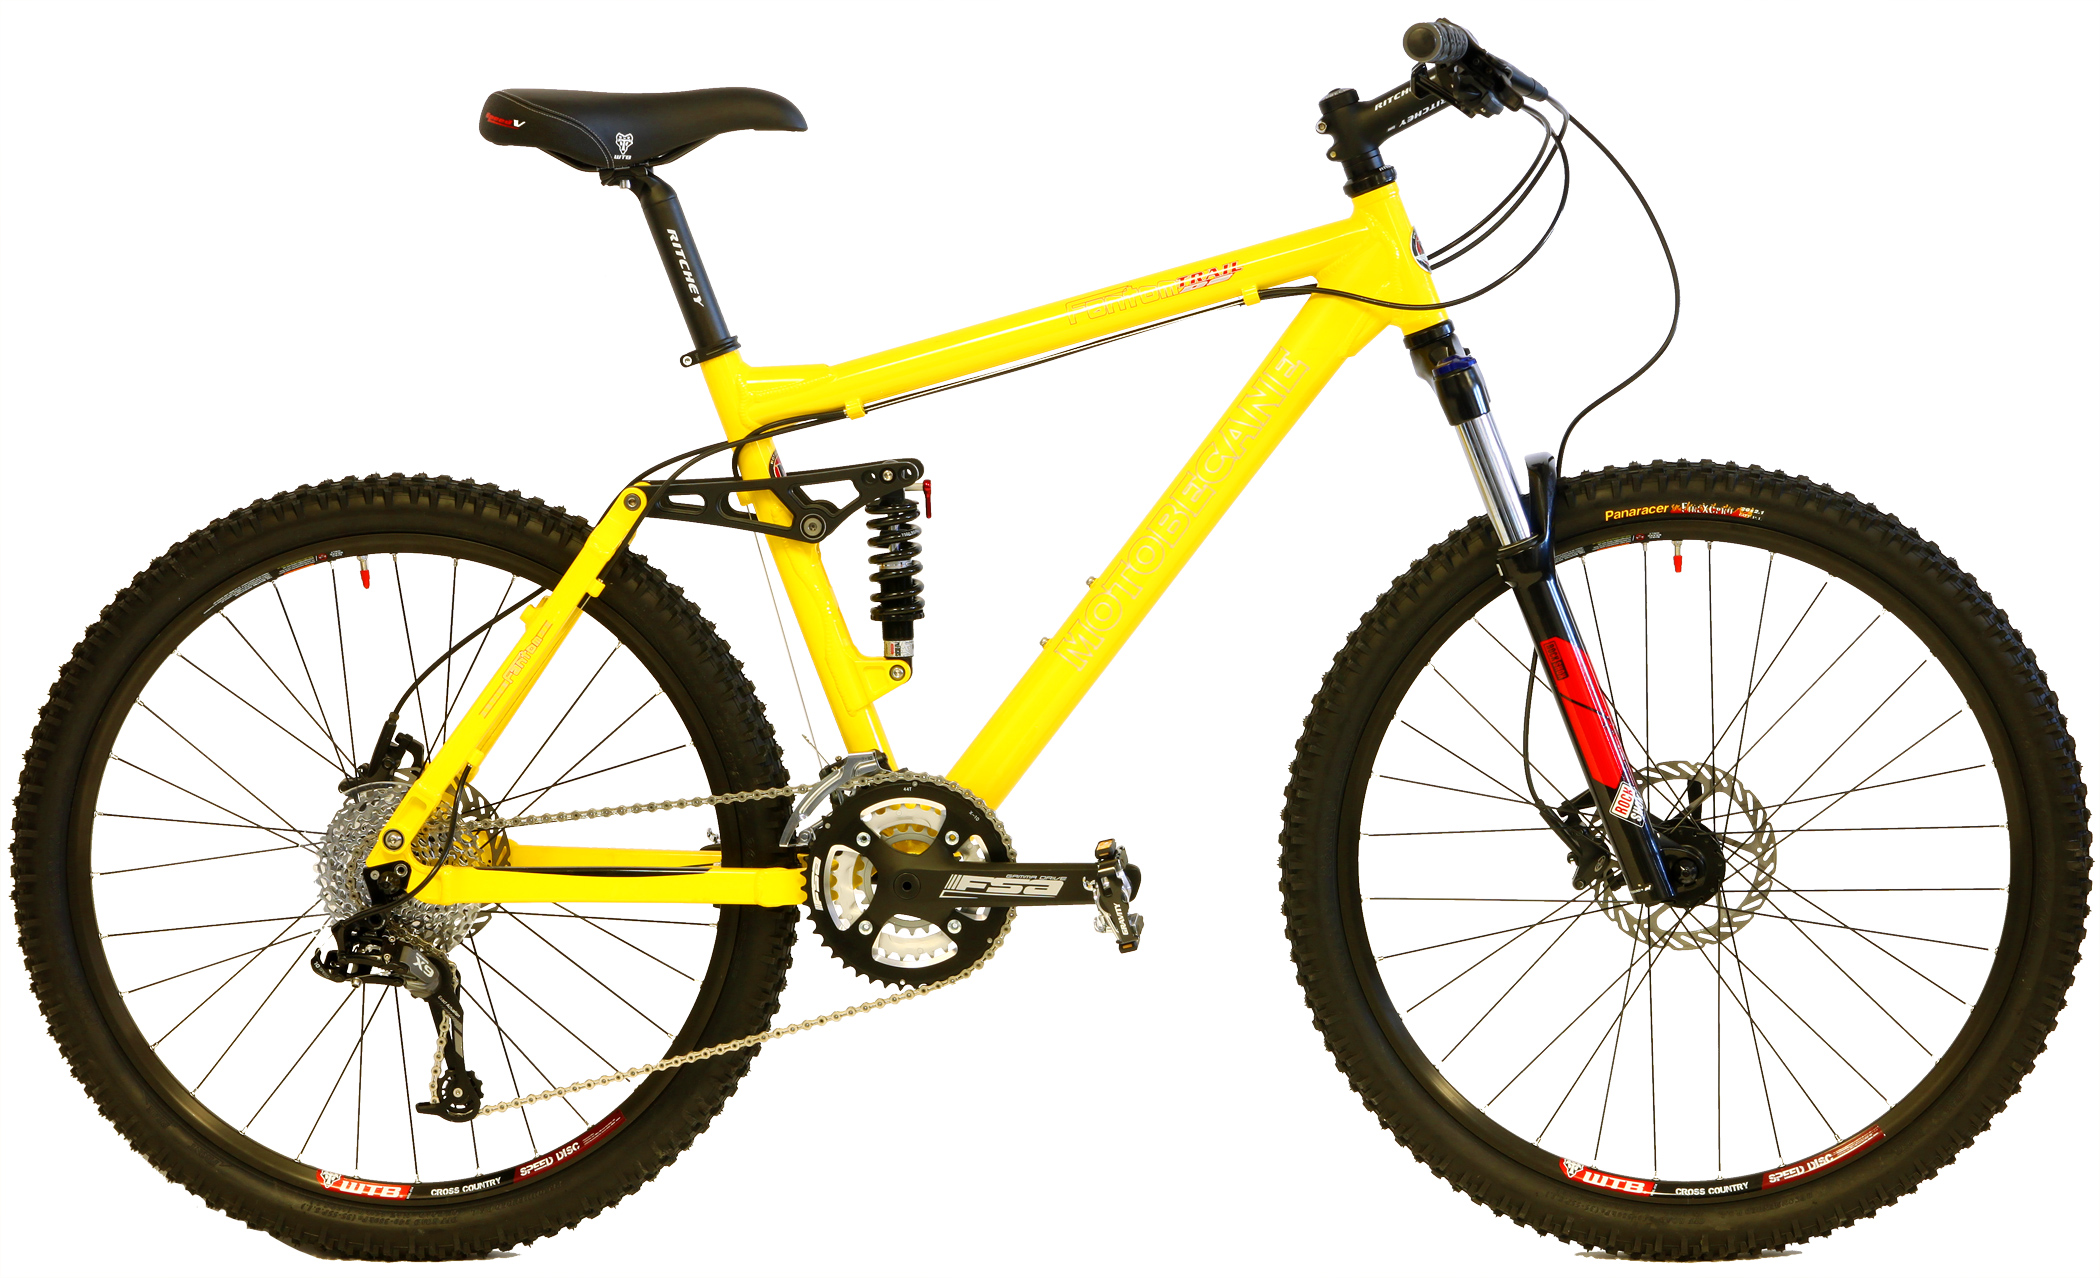 best mountain bike for 1000 pounds